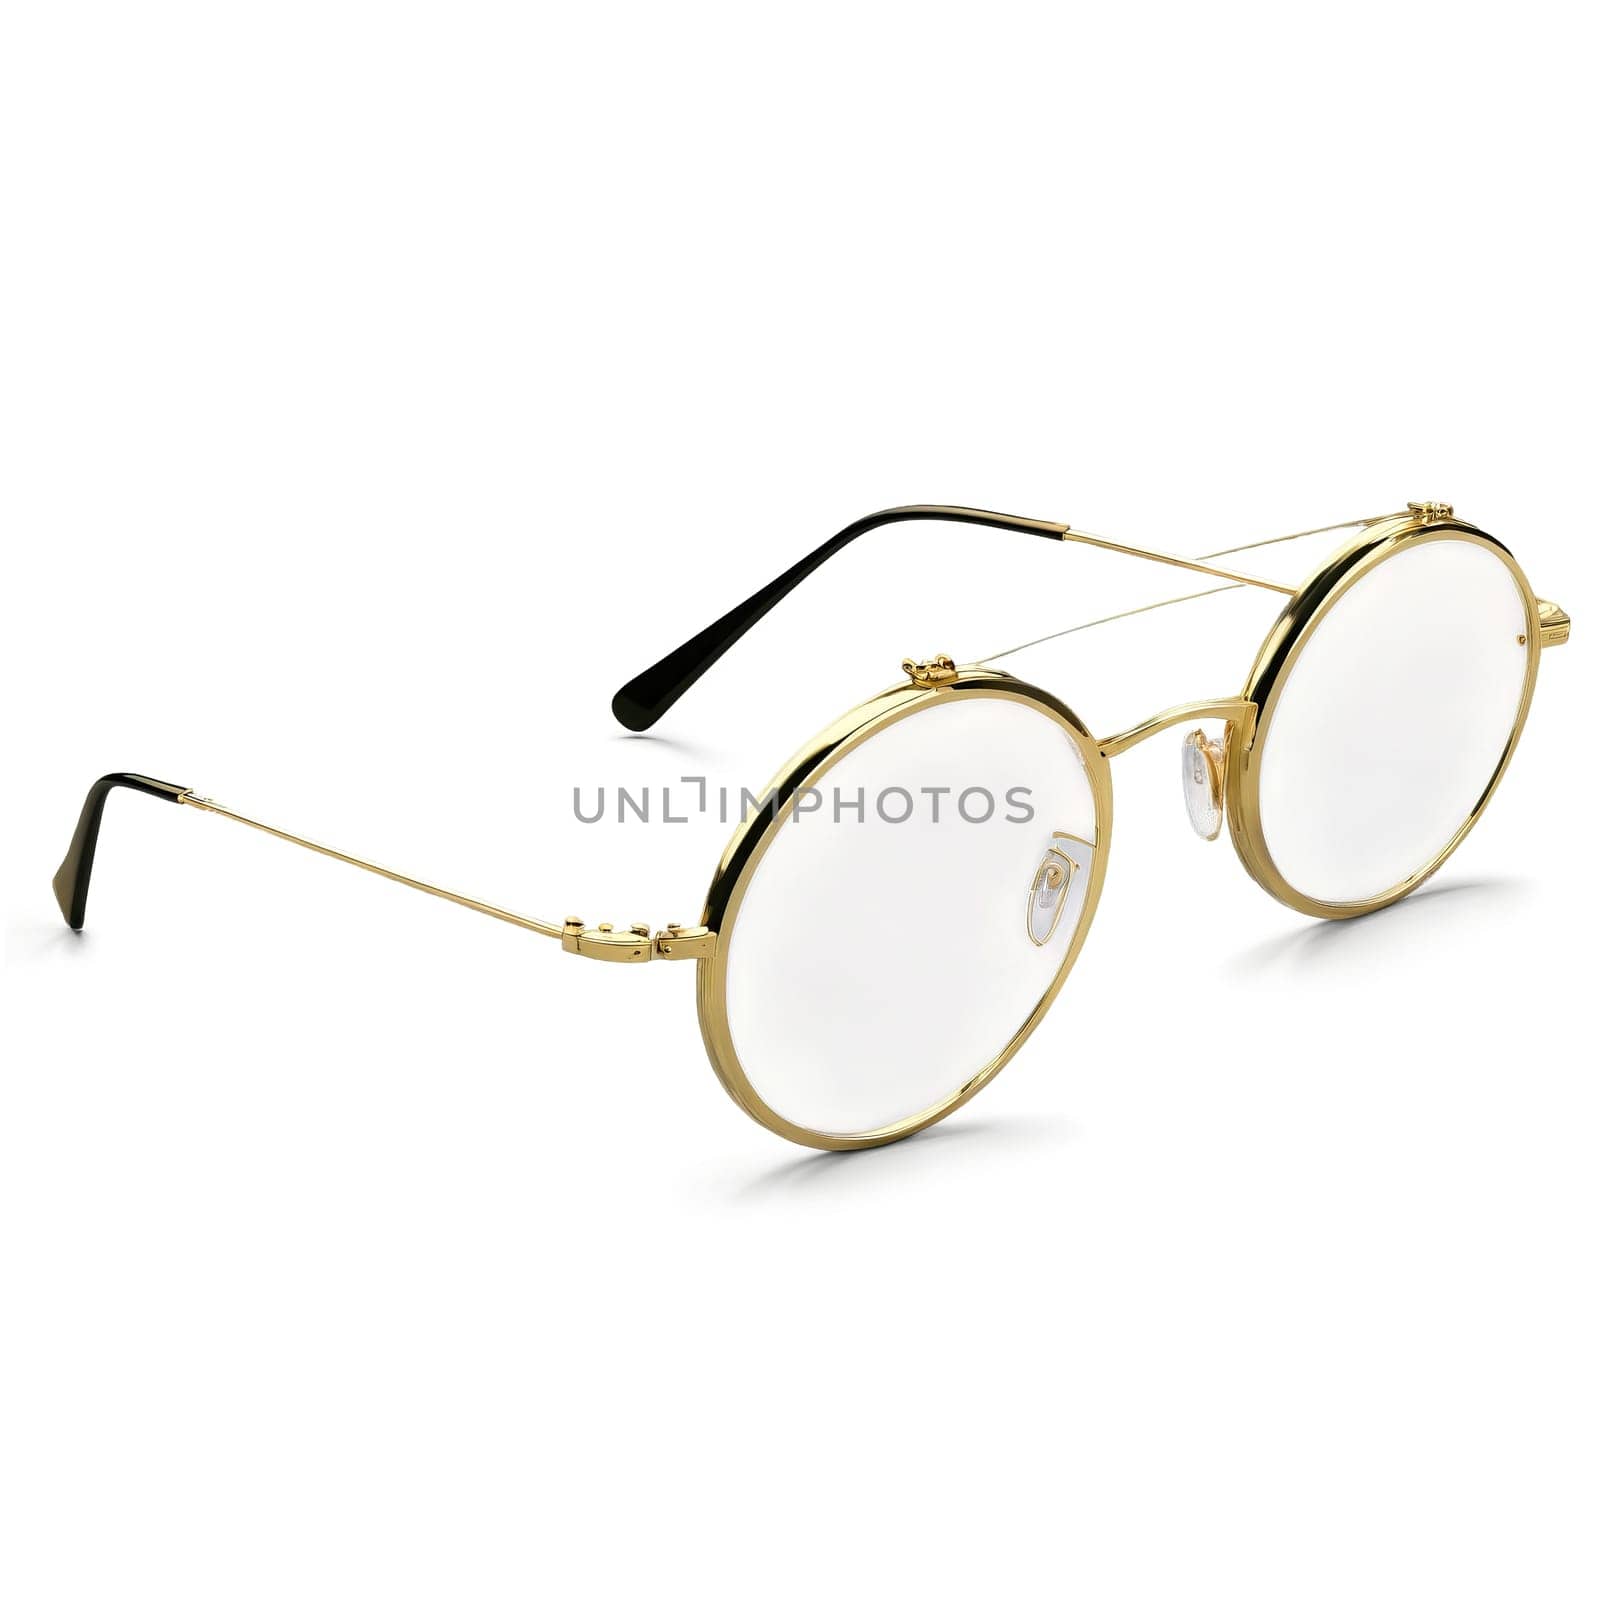 Round glasses with gold tone metal frames and photochromic lenses adapting to changing light conditions. Product isolated on transparent background